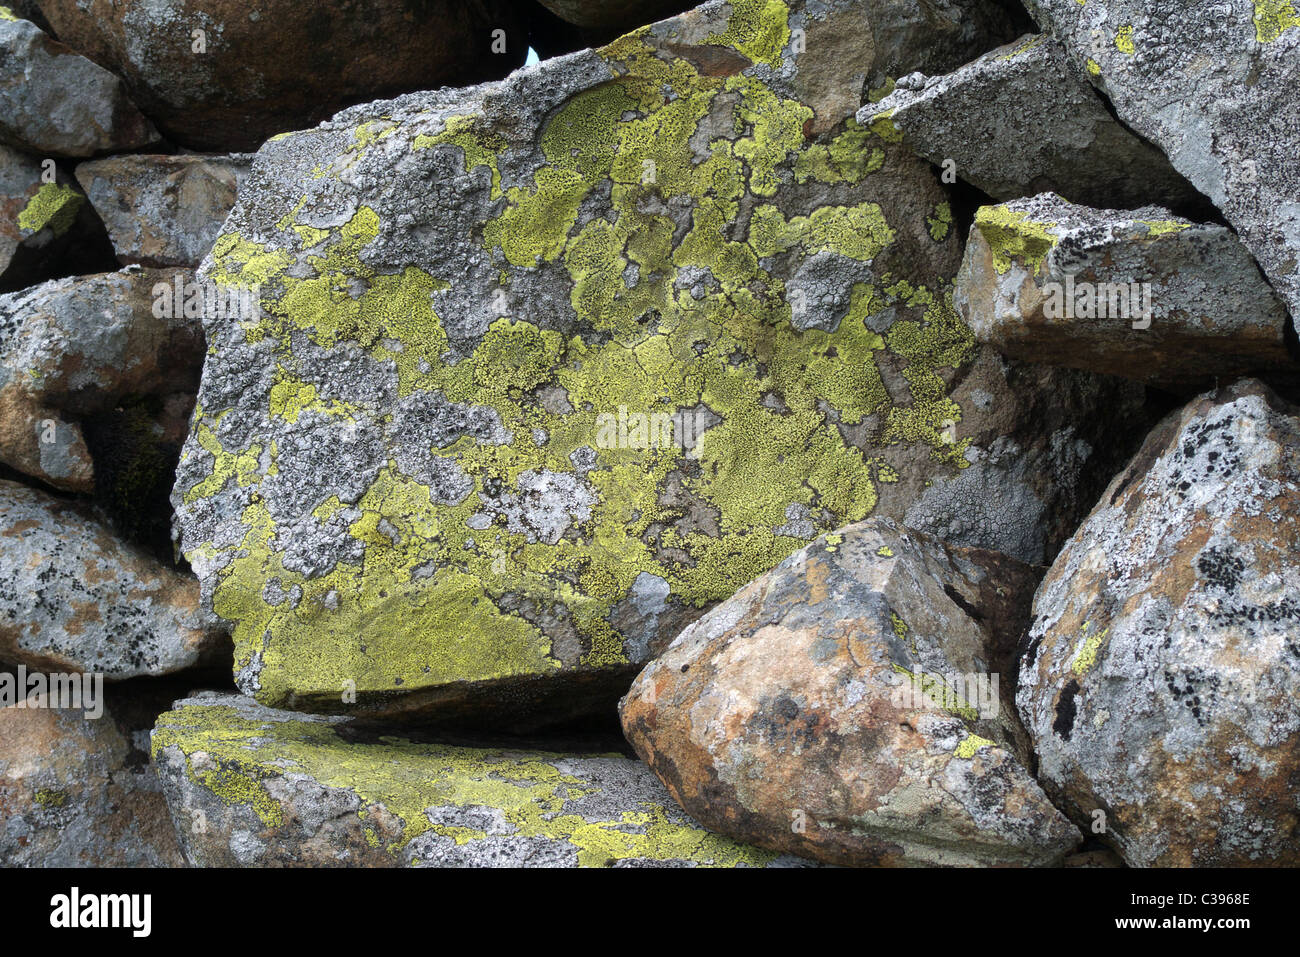 Rhizocarpon geographicum ( Map Lichen ) growing on rocks forming part of a Dry Stone Wall, UK Stock Photo